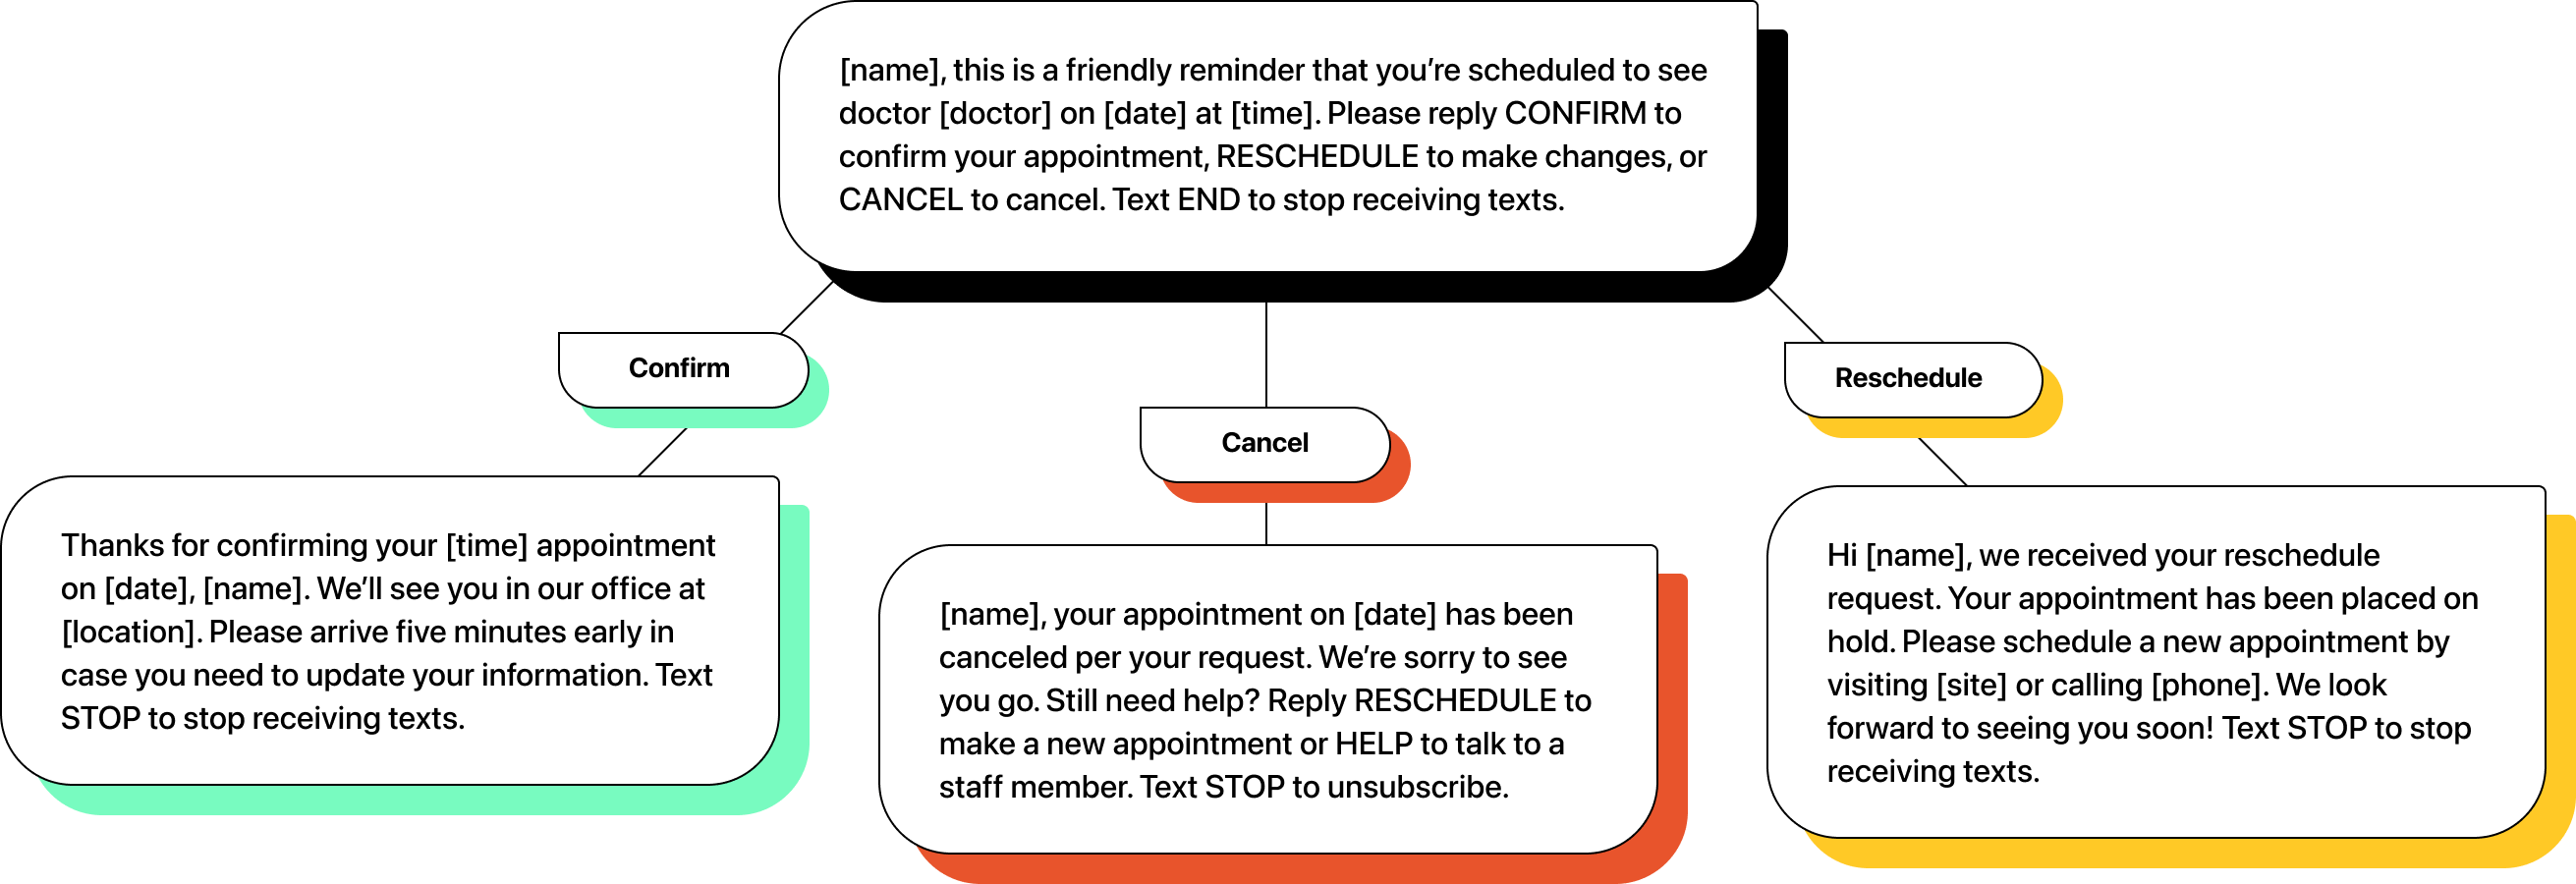 Appointment text decision tree for confirming, cancelling, and rescheduling an appointment